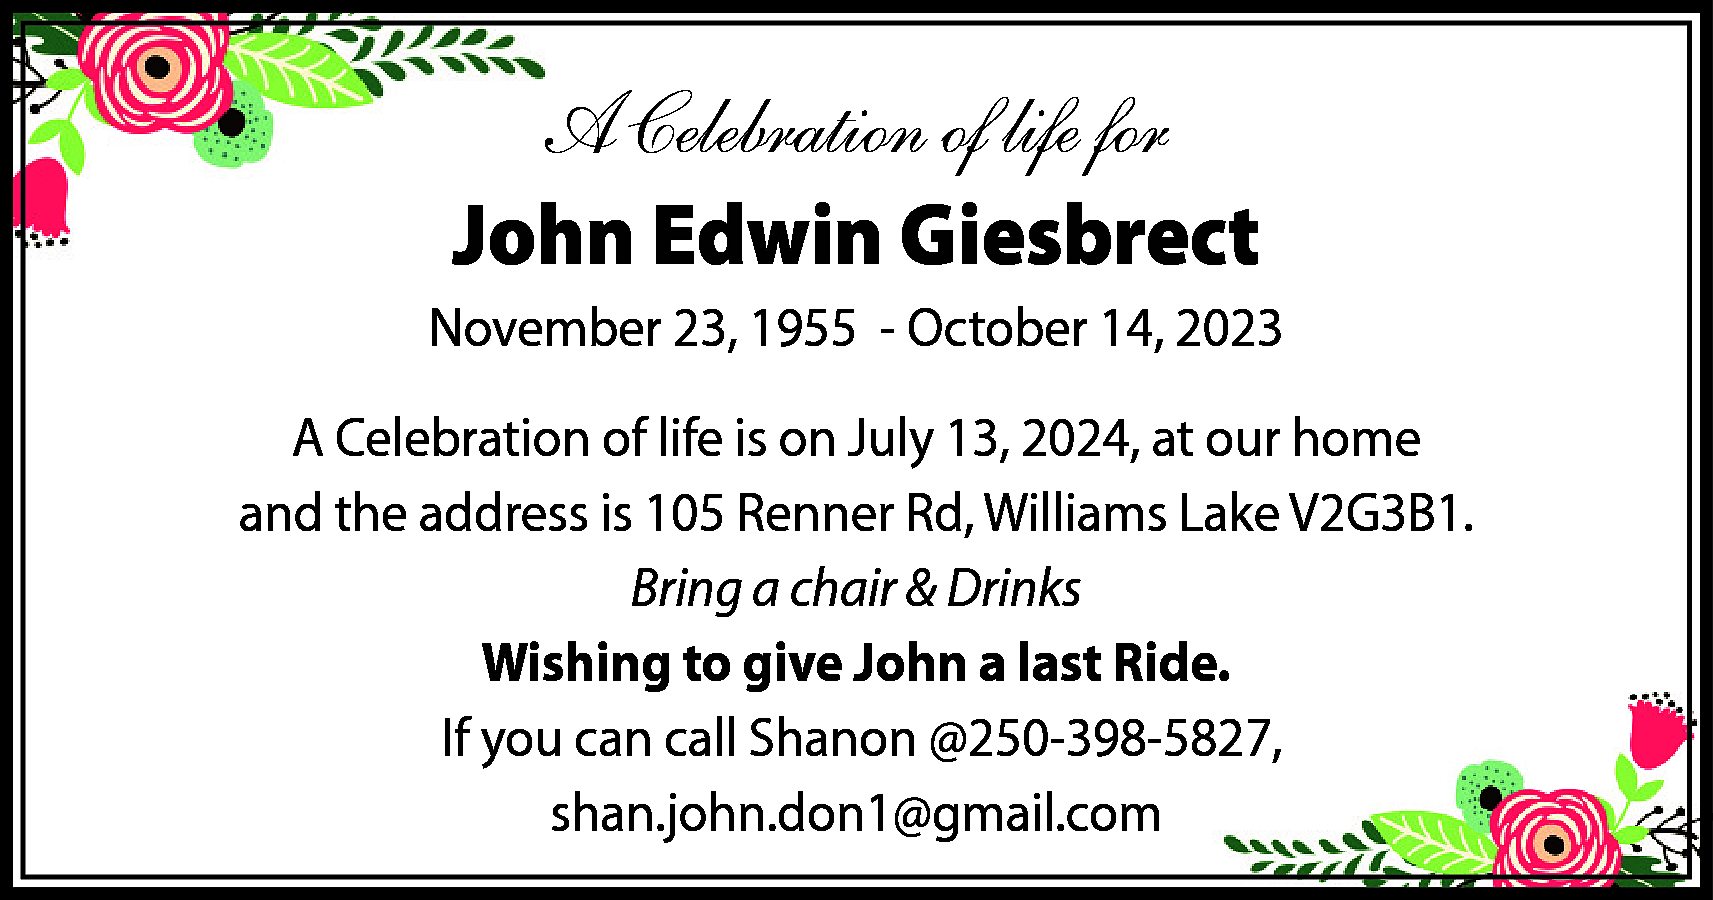 A Celebration of life for  A Celebration of life for  John Edwin Giesbrect  November 23, 1955 - October 14, 2023  A Celebration of life is on July 13, 2024, at our home  and the address is 105 Renner Rd, Williams Lake V2G3B1.  Bring a chair & Drinks  Wishing to give John a last Ride.  If you can call Shanon @250-398-5827,  shan.john.don1@gmail.com    